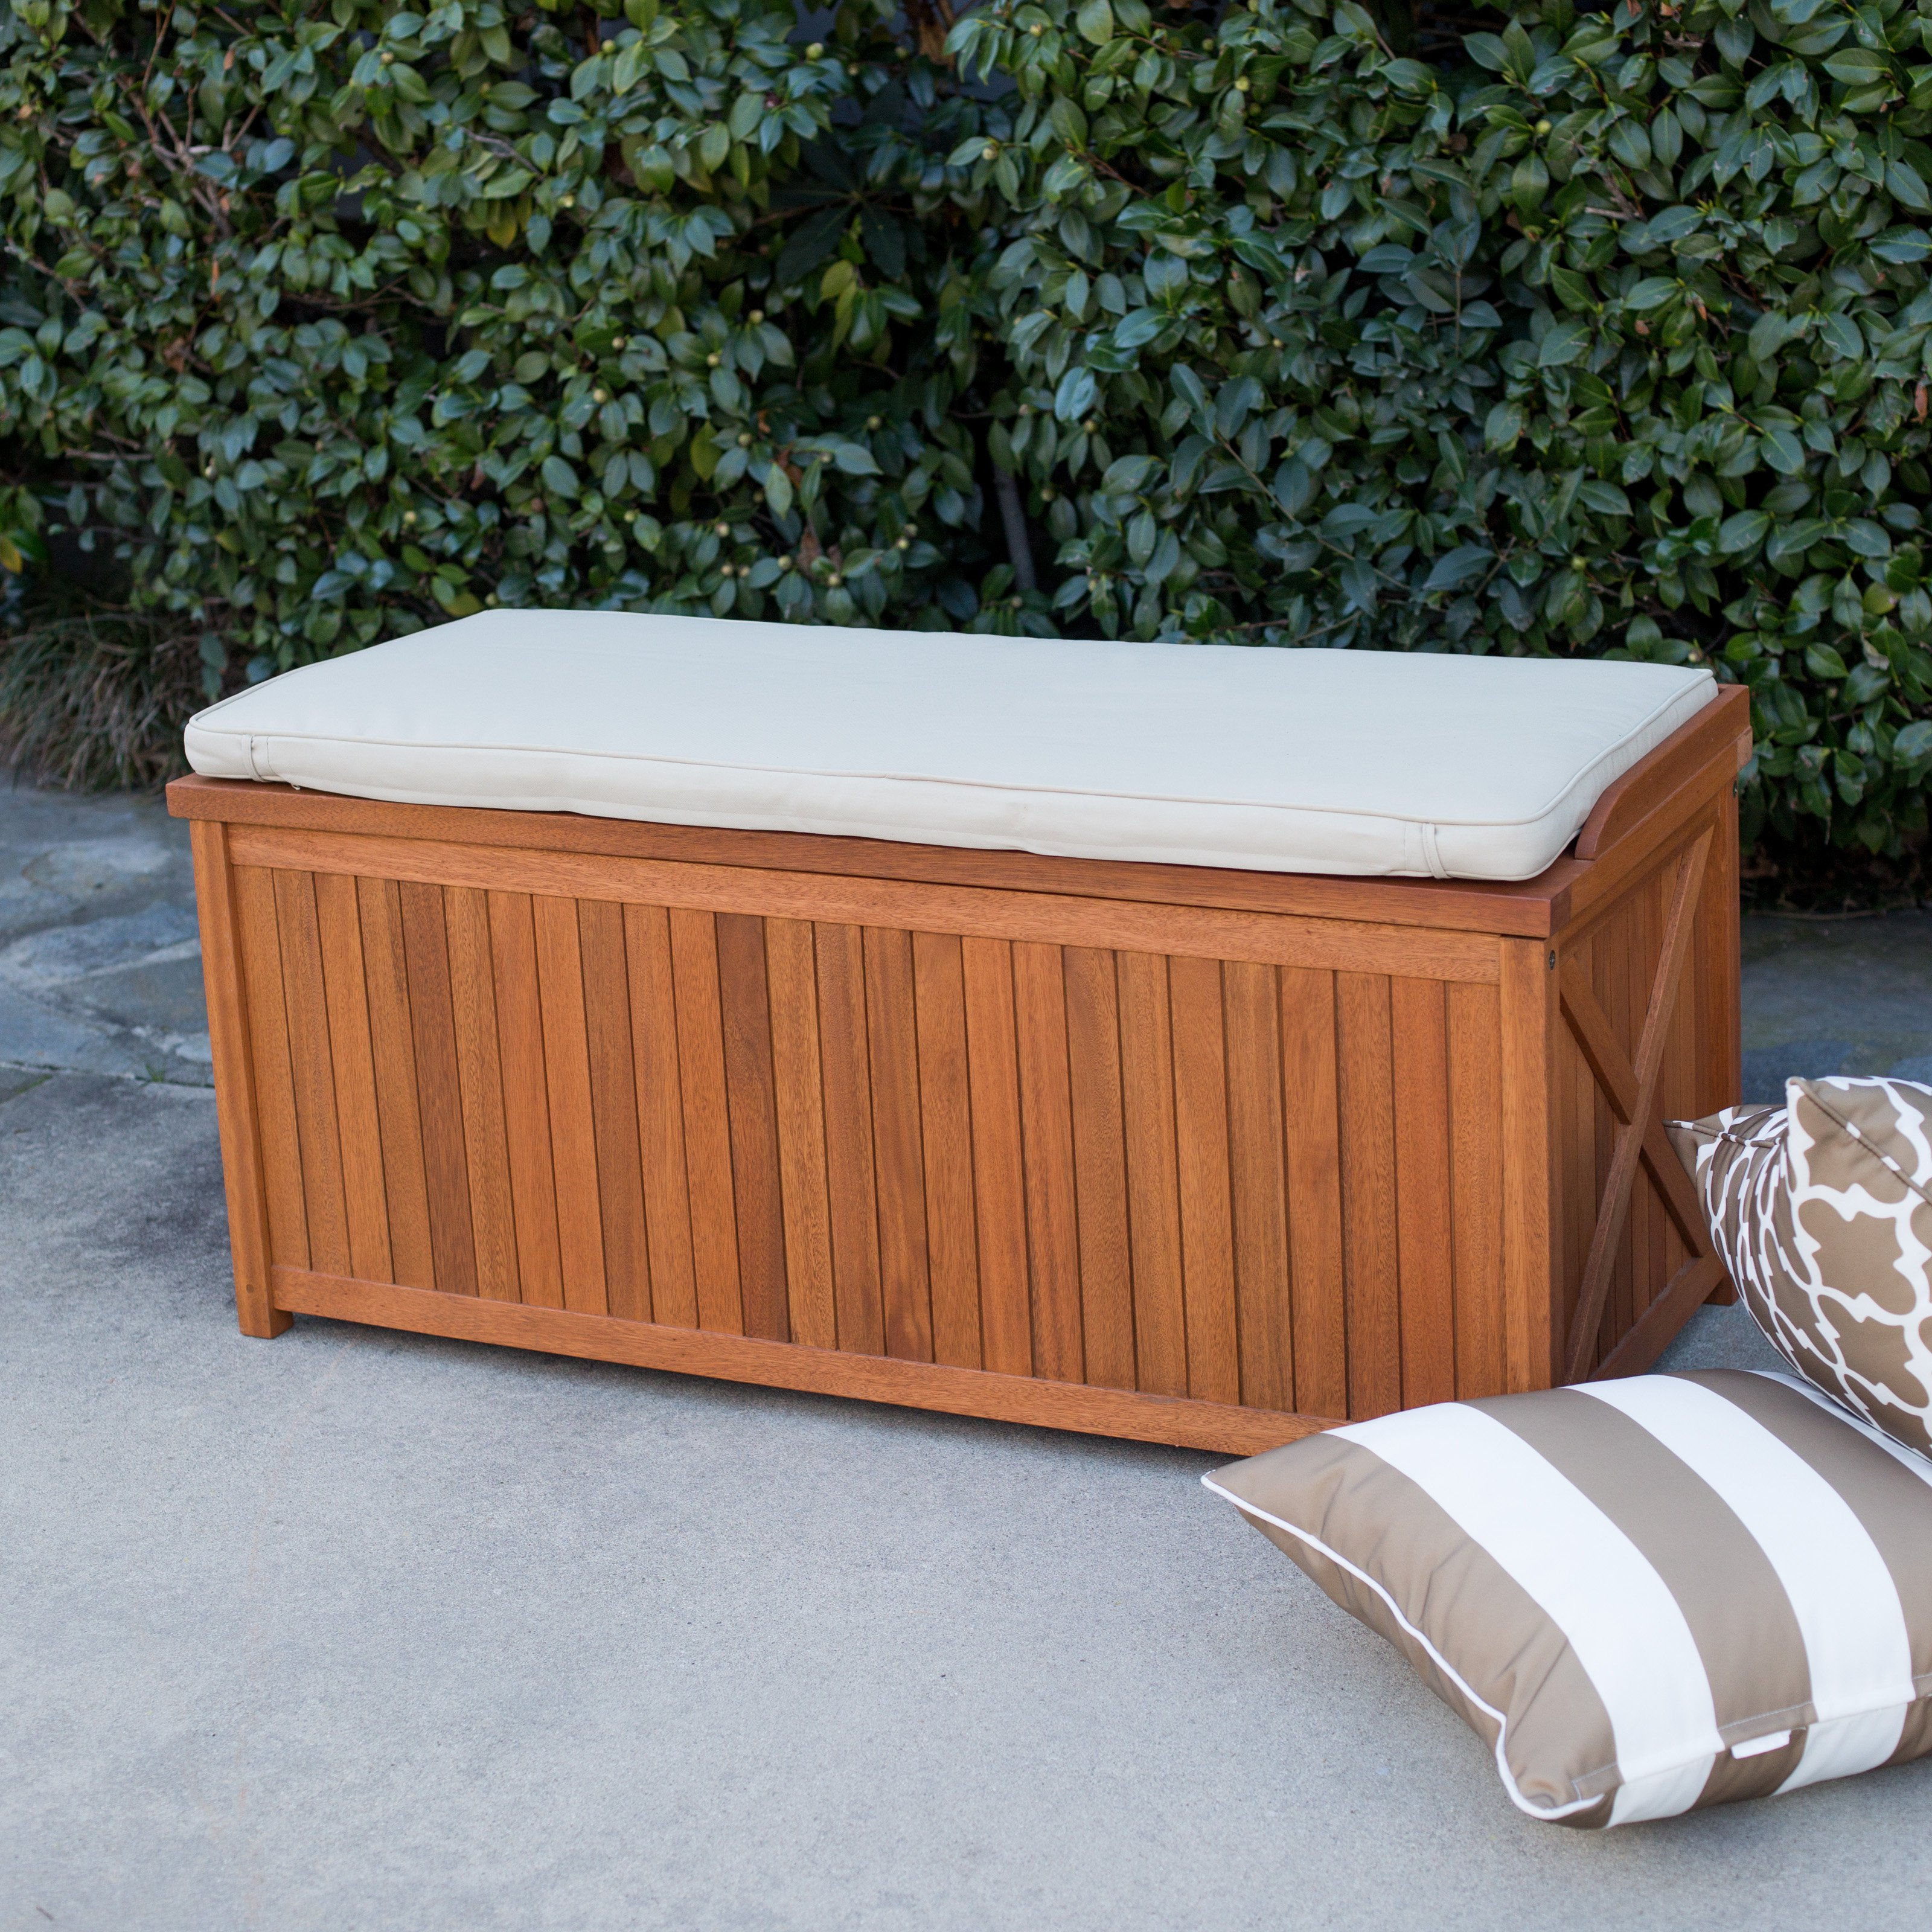 Belham Living Brighton 48 In Outdoor Storage Deck Box With Cushion in measurements 3200 X 3200